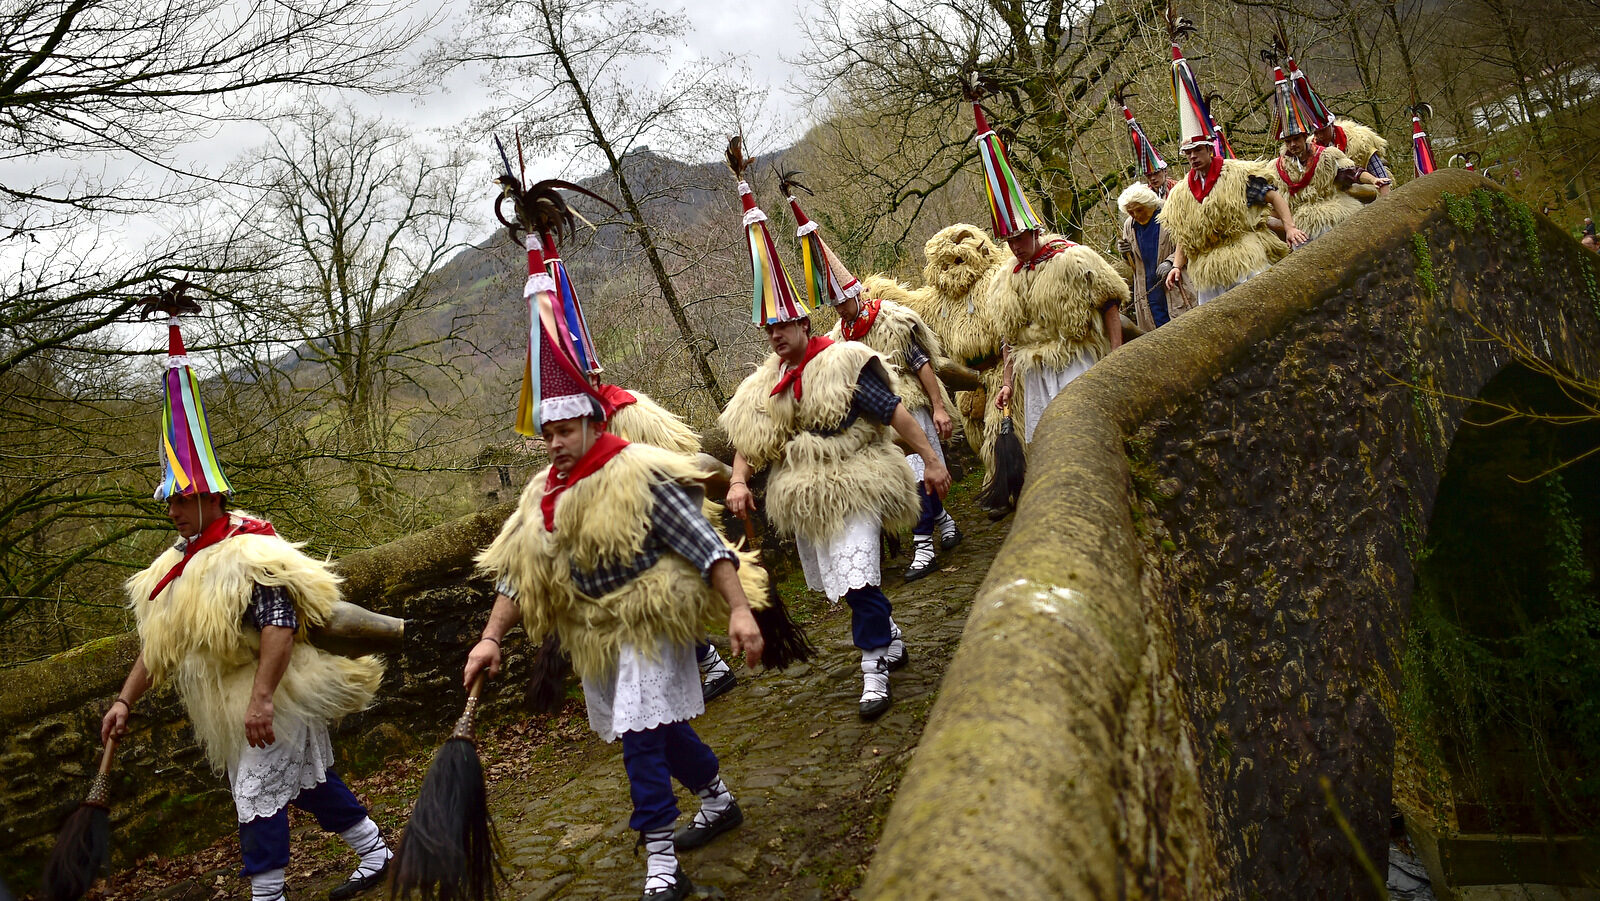 Joaldunaks walk on their way to take part in the Carnival between the Pyrenees villages of Ituren and Zubieta, northern Spain, Monday, Feb.1, 2016. In one of the most ancient carnivals in Europe, dating from before the Roman empire, companies of Joaldunak (cowbells) made up of residents of two towns, Ituren and Zubieta, parade the streets costumed in sandals, lace petticoats, sheepskins around the waist and shoulders, coloured neckerchiefs, conical caps with ribbons and a hyssop of horsehair in their right hands and cowbells hung across their lower back. (AP Photo/Alvaro Barrientos)